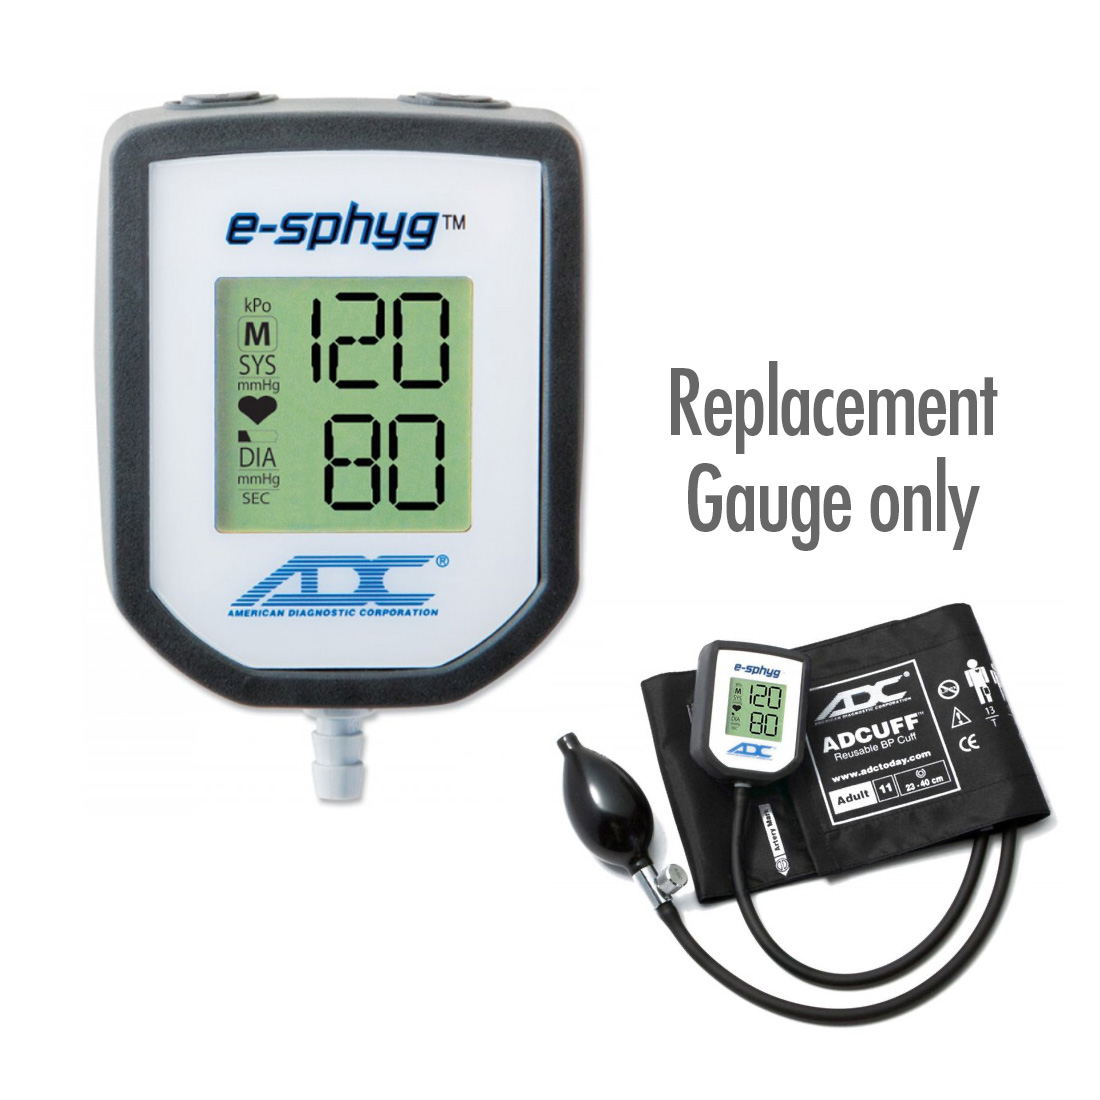 E-sphyg™ Digital Aneroid Replacement Gauge